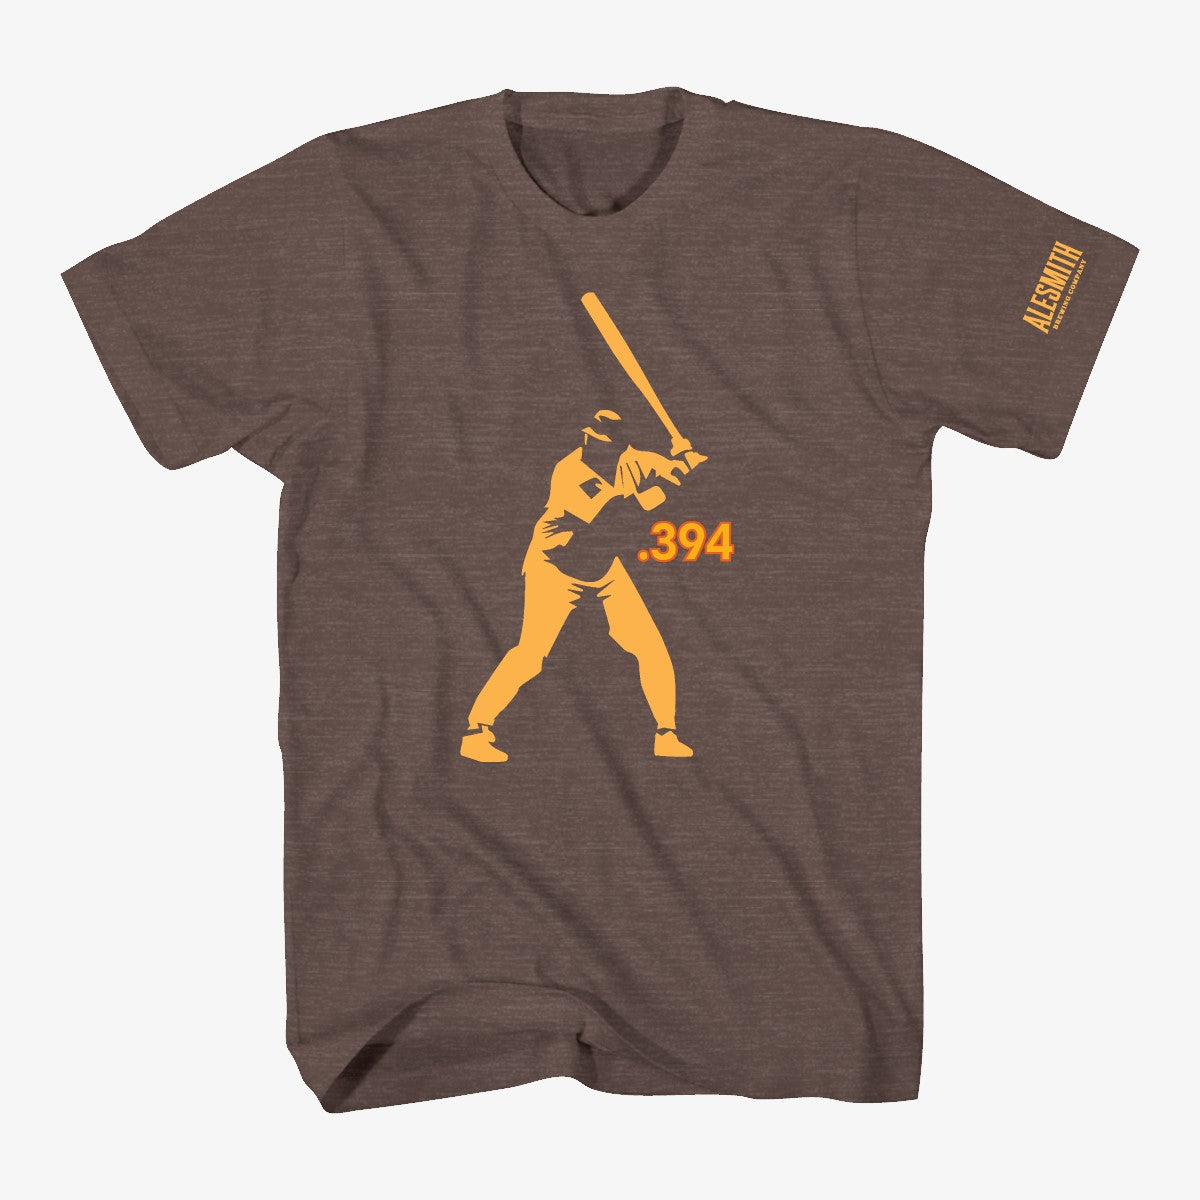 .394 Batter T-Shirt - AleSmith Brewing Co.